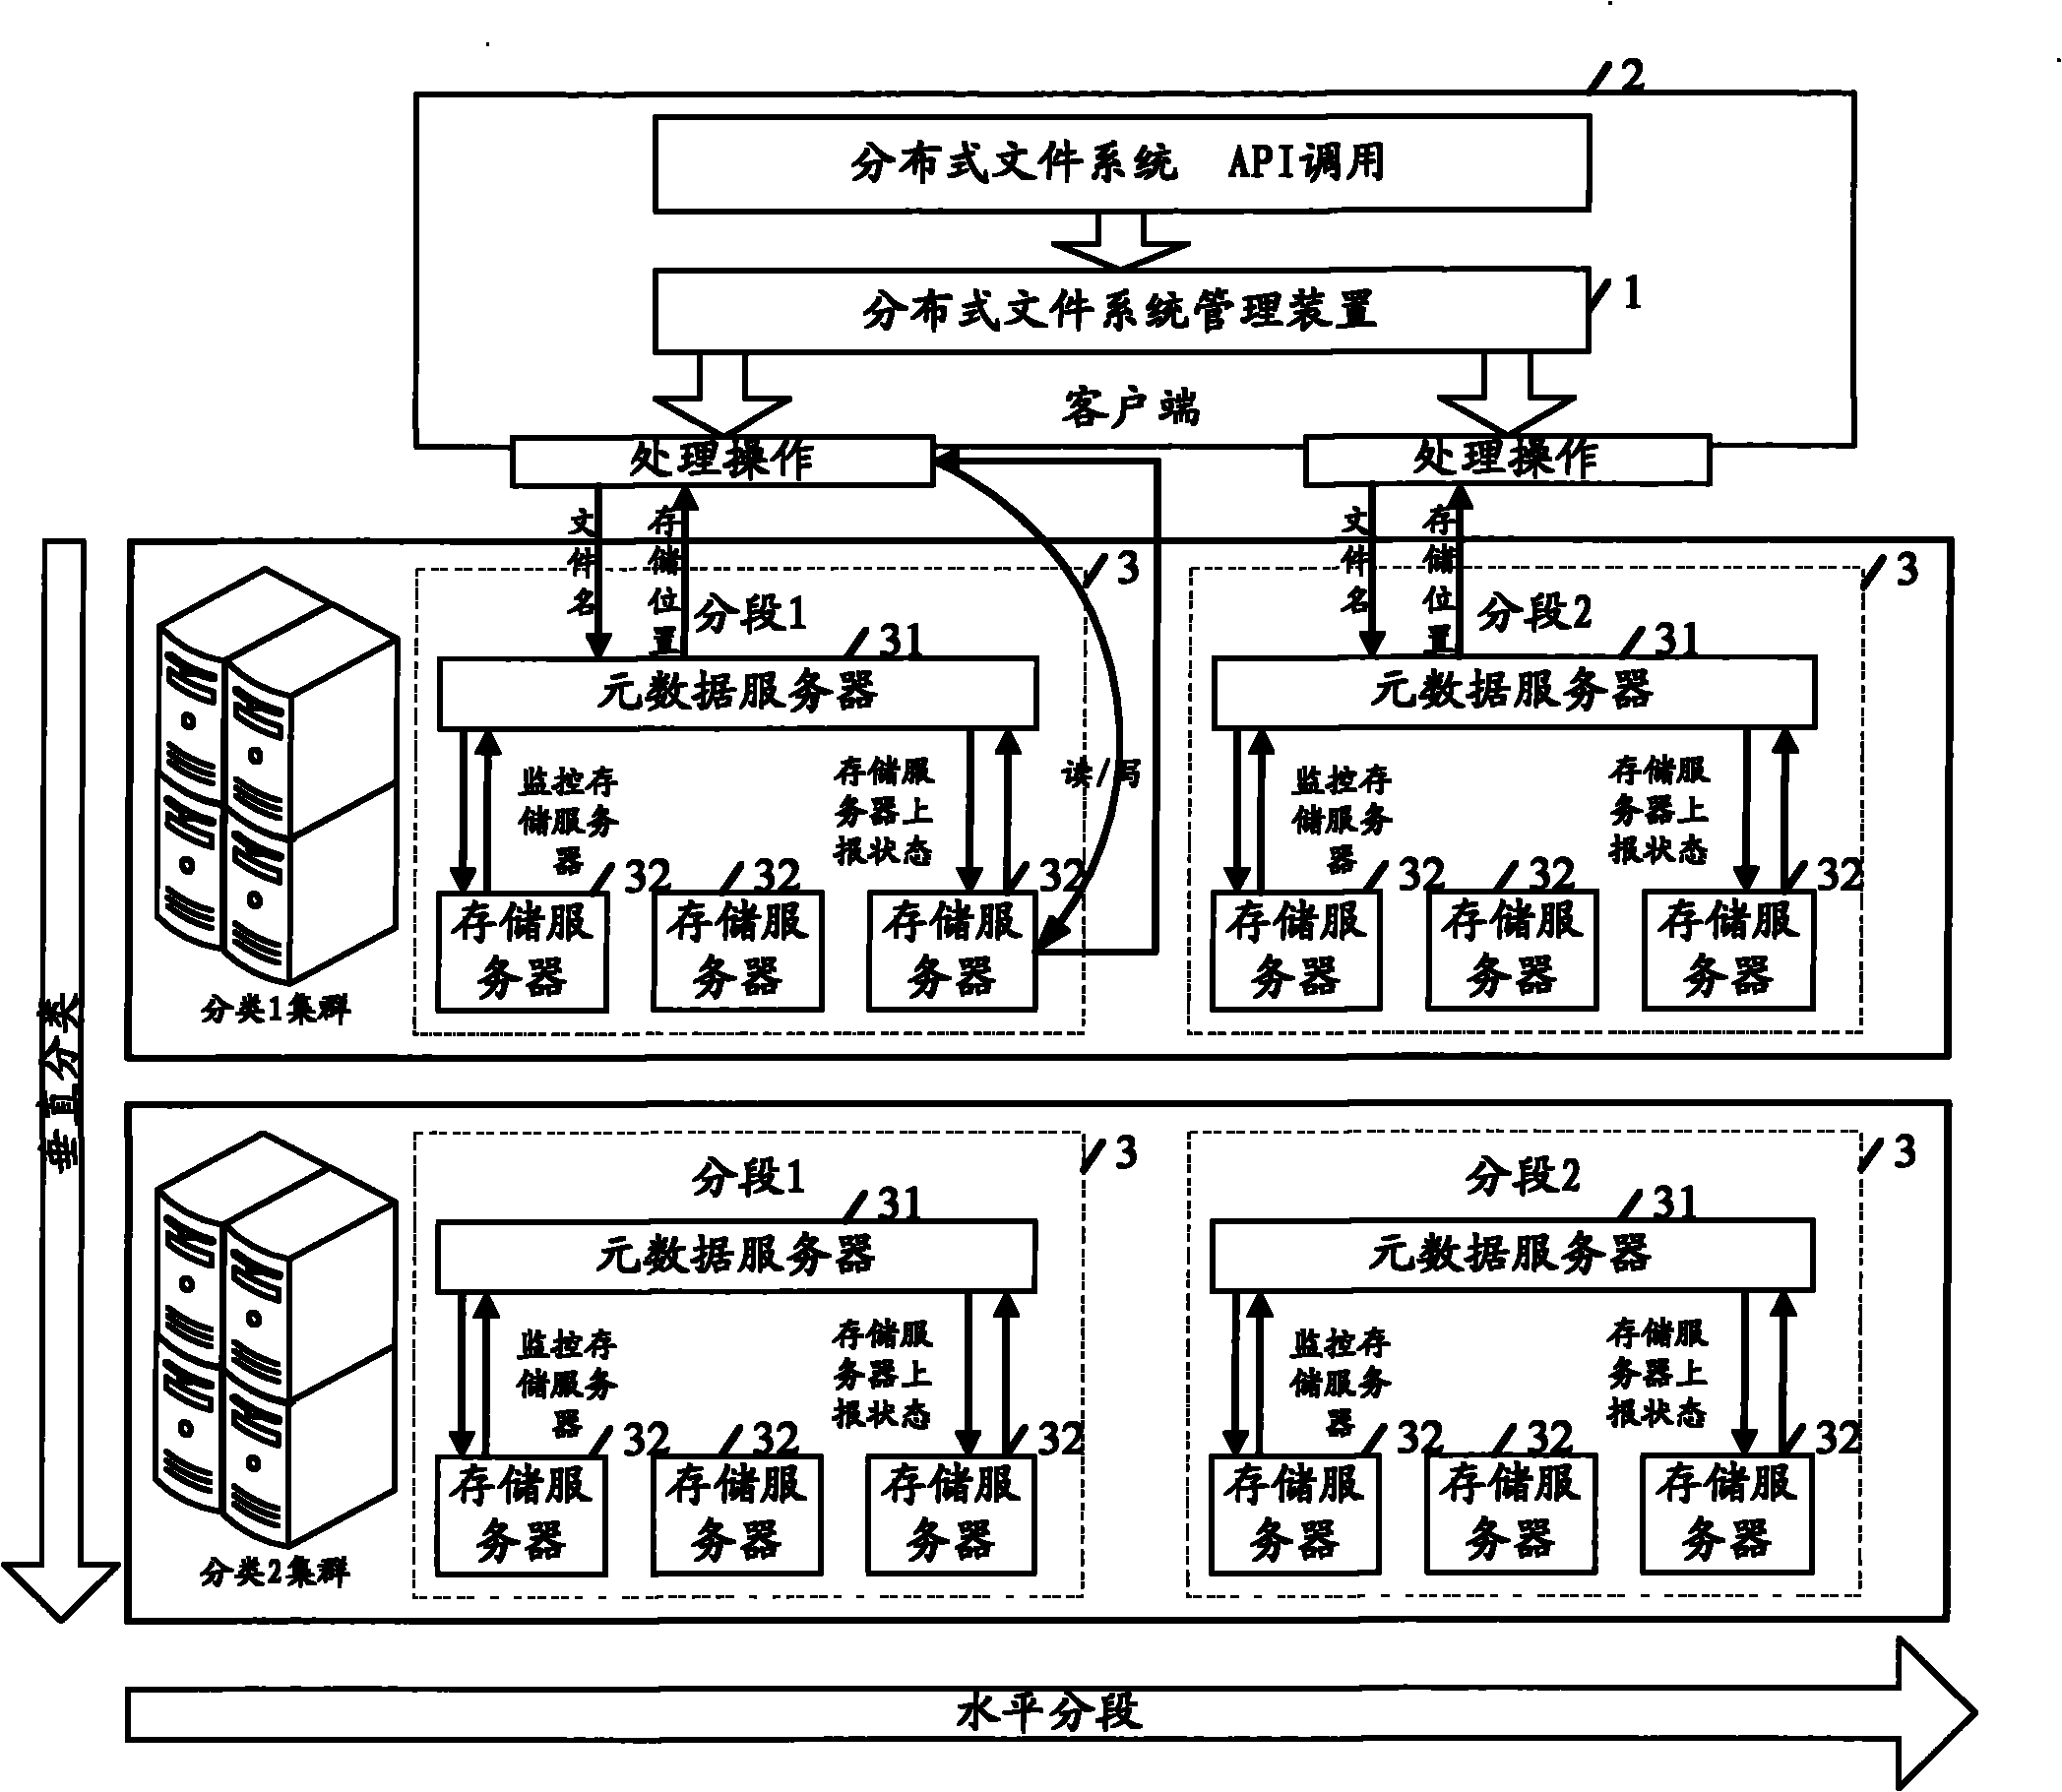 Distributed file system management method, device and corresponding file system